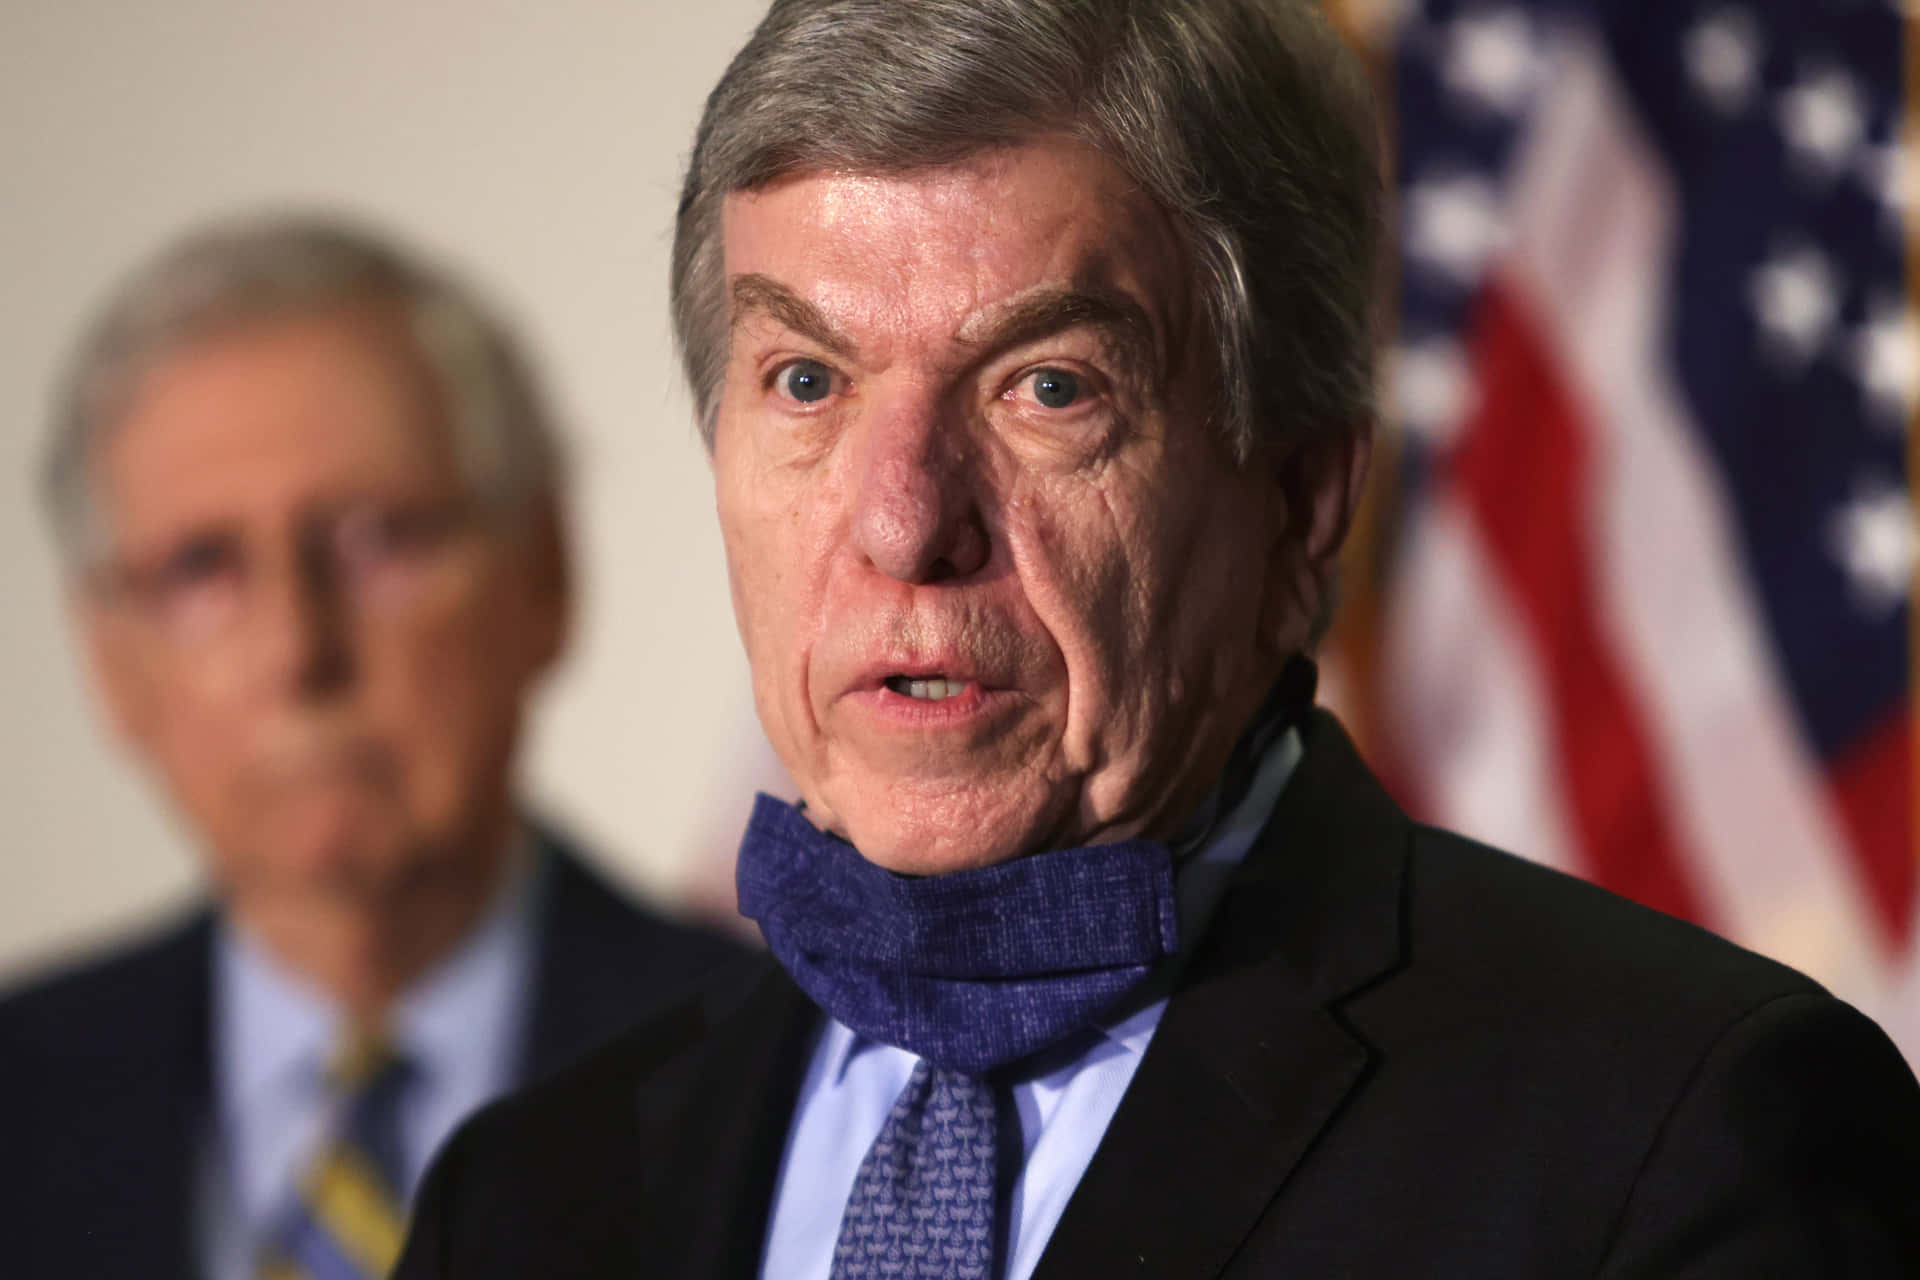 Royblunt Mask Under His Chin (roy Blunt Mask Under Hans Haka) - This Sentence Doesn't Relate To Computer Or Mobile Wallpaper And Doesn't Need A Translation In This Context. Could You Please Provide A Different Sentence Related To The Given Context? Wallpaper